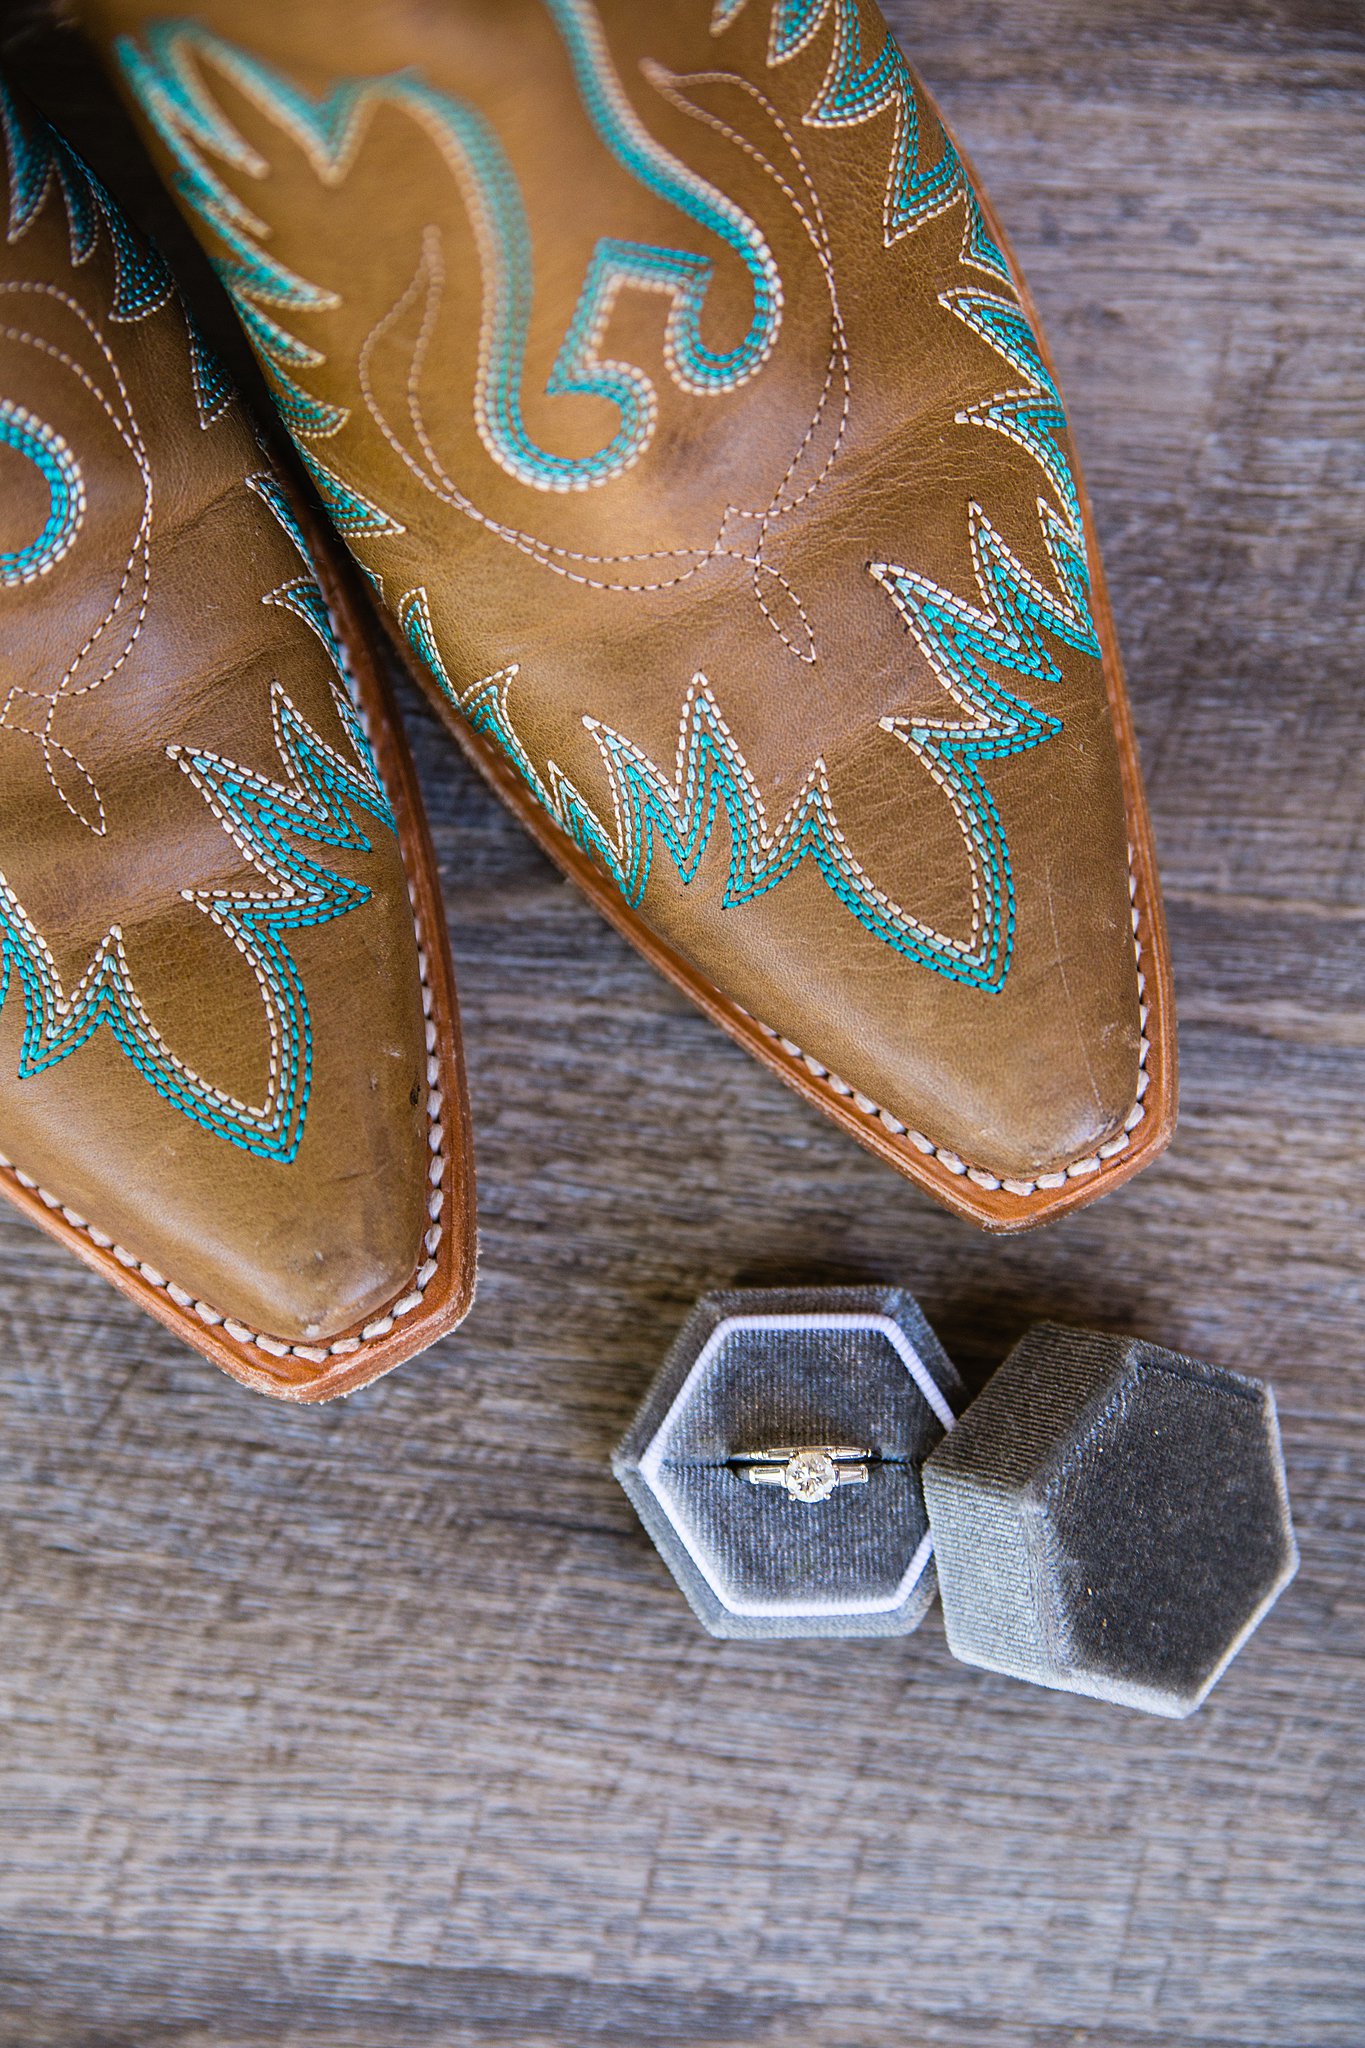 Bride's wedding boots with blue stitching and her simple white gold wedding ring by PMA Photography.